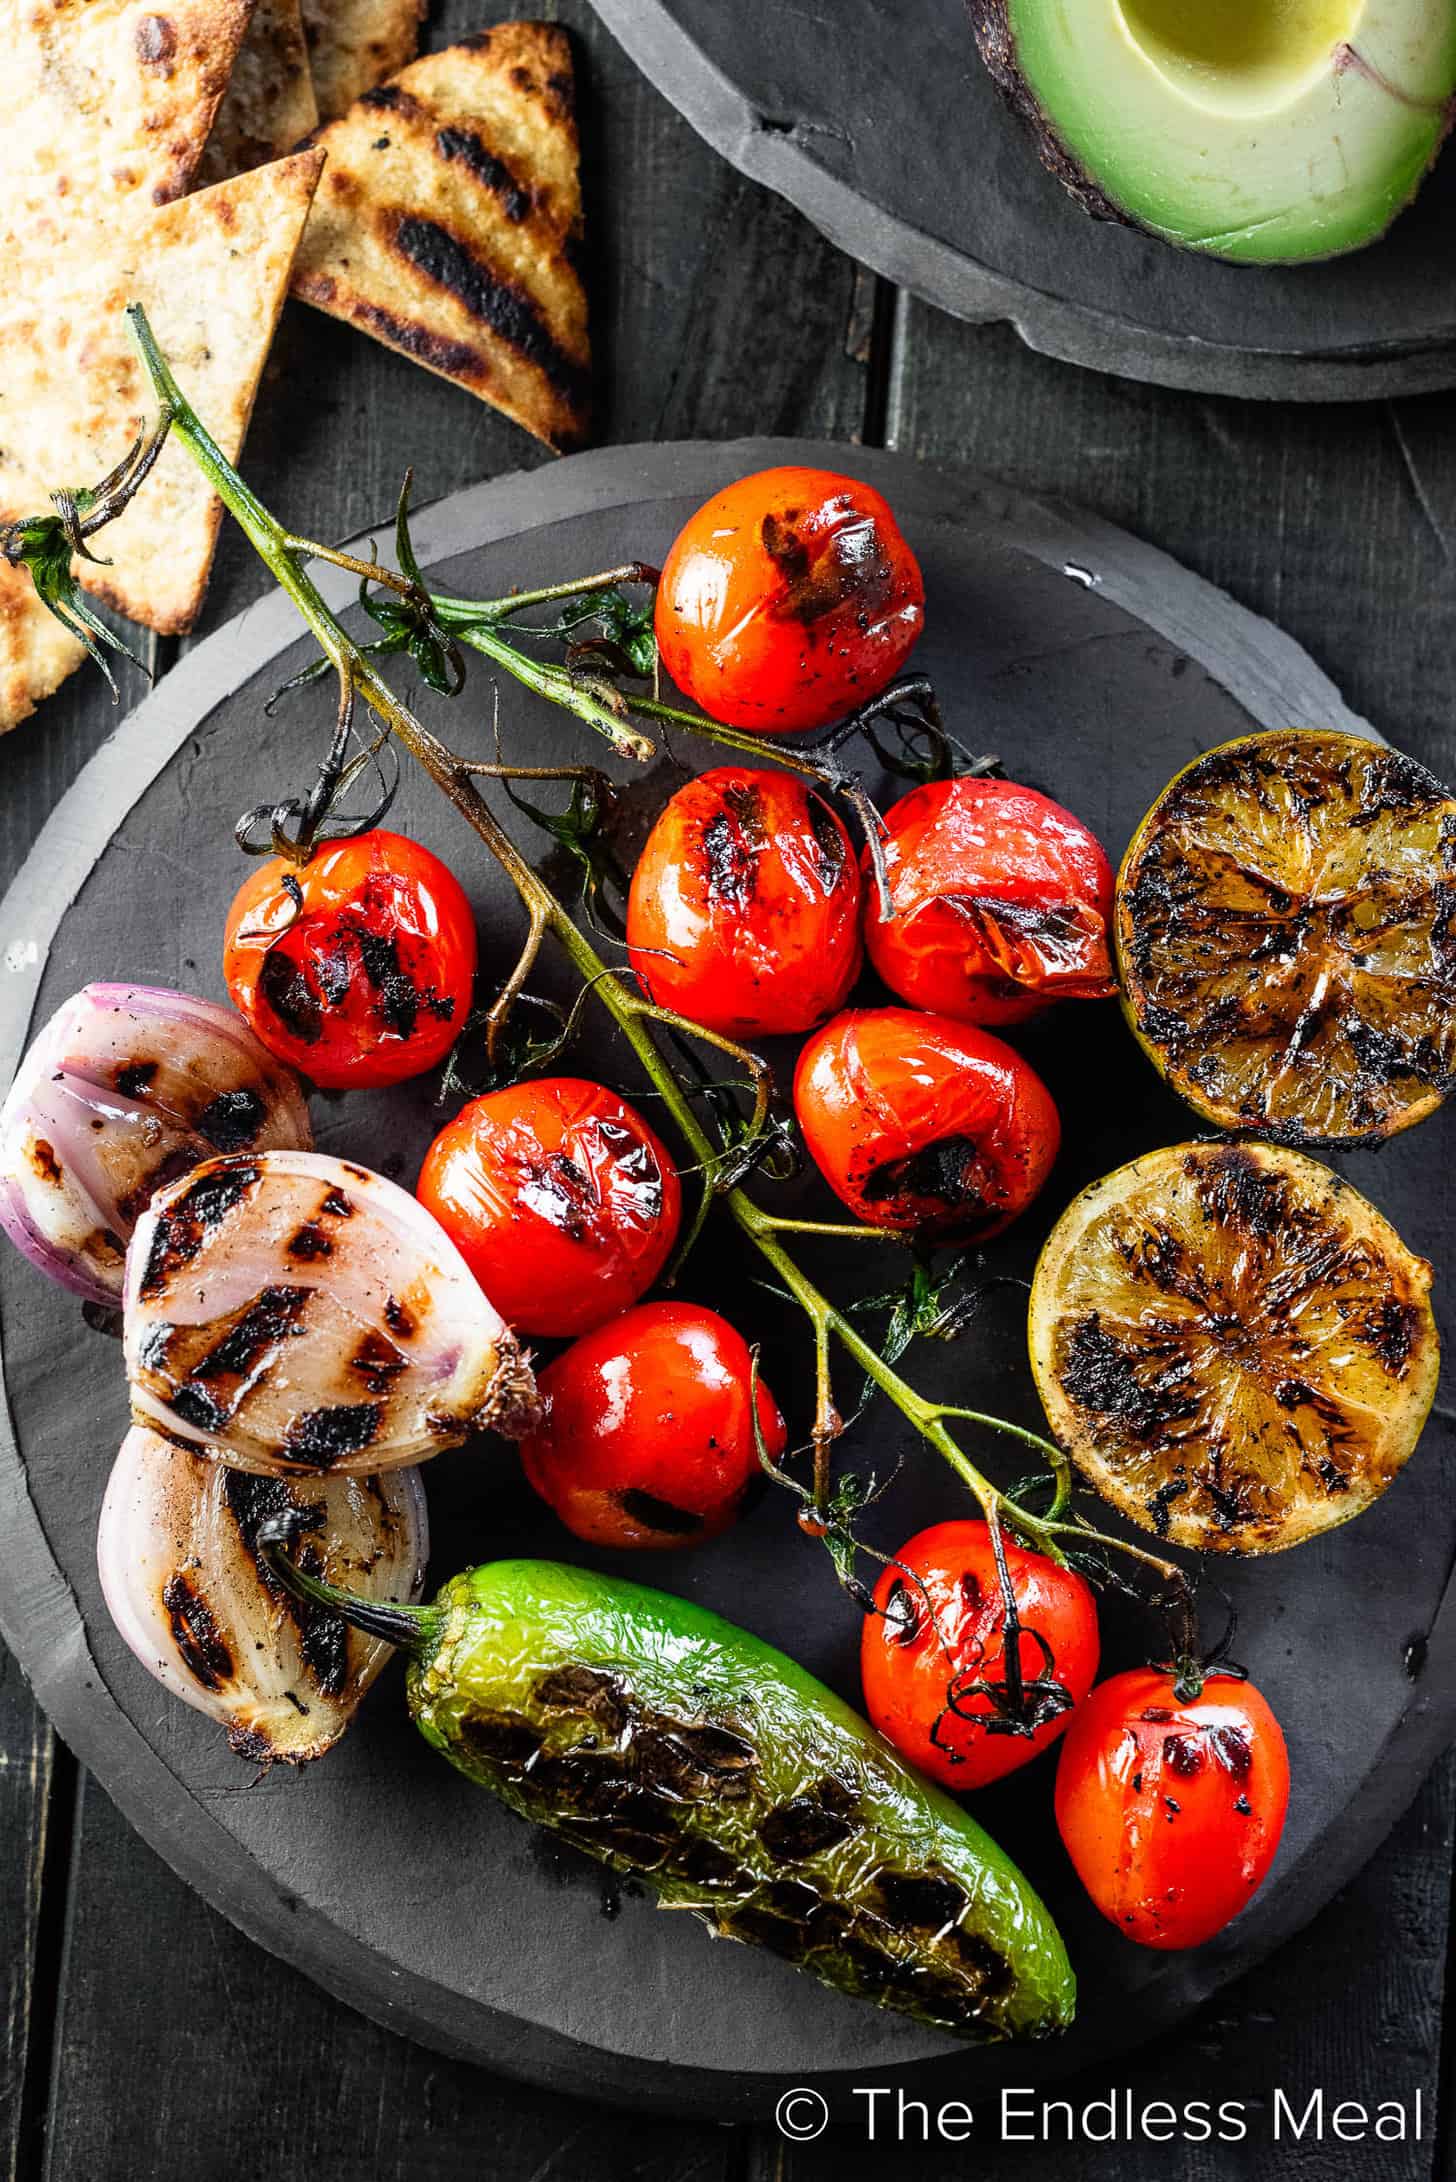 A plate of grilled vegetables to be made into guacamole